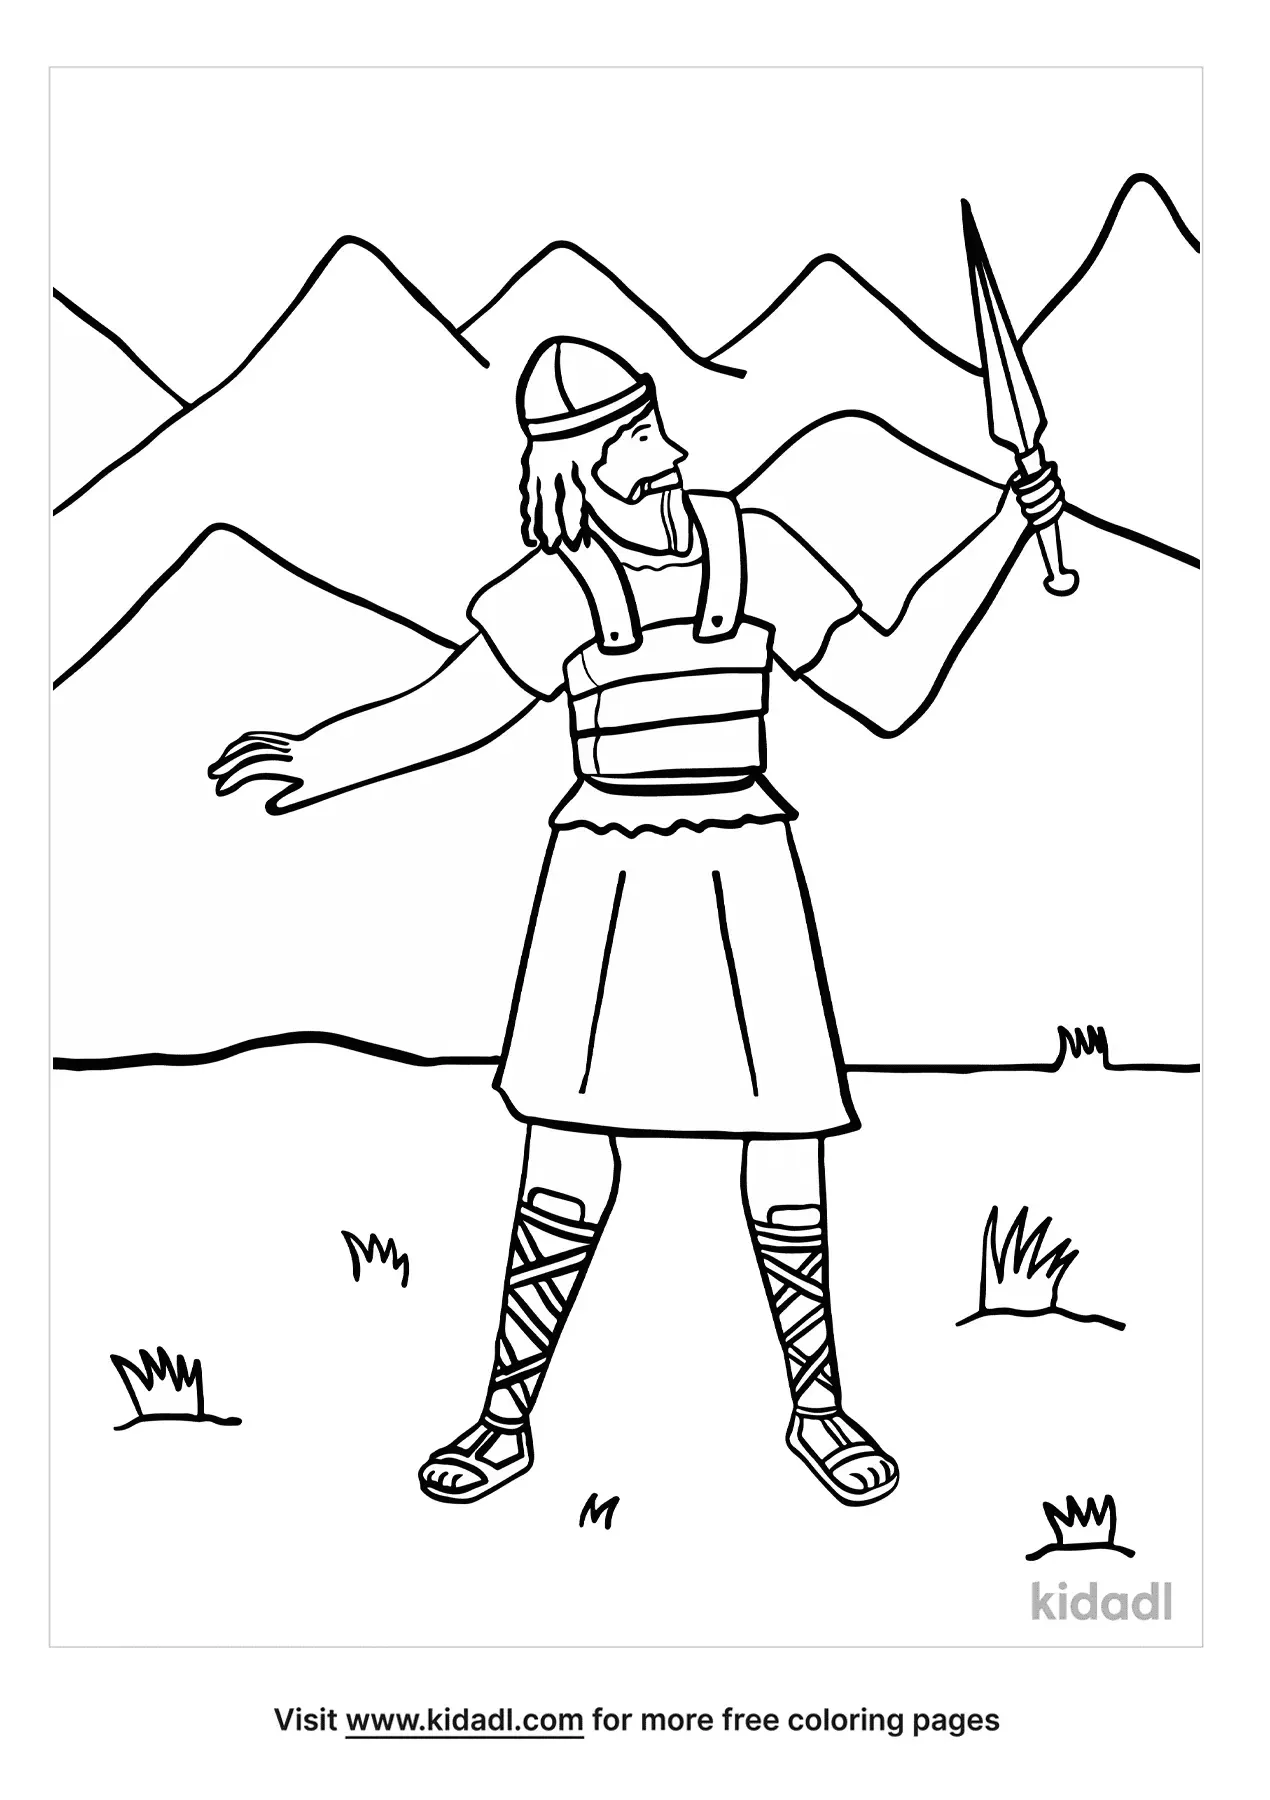 Bible Coloring Pages | Coloring Pages | Kidadl